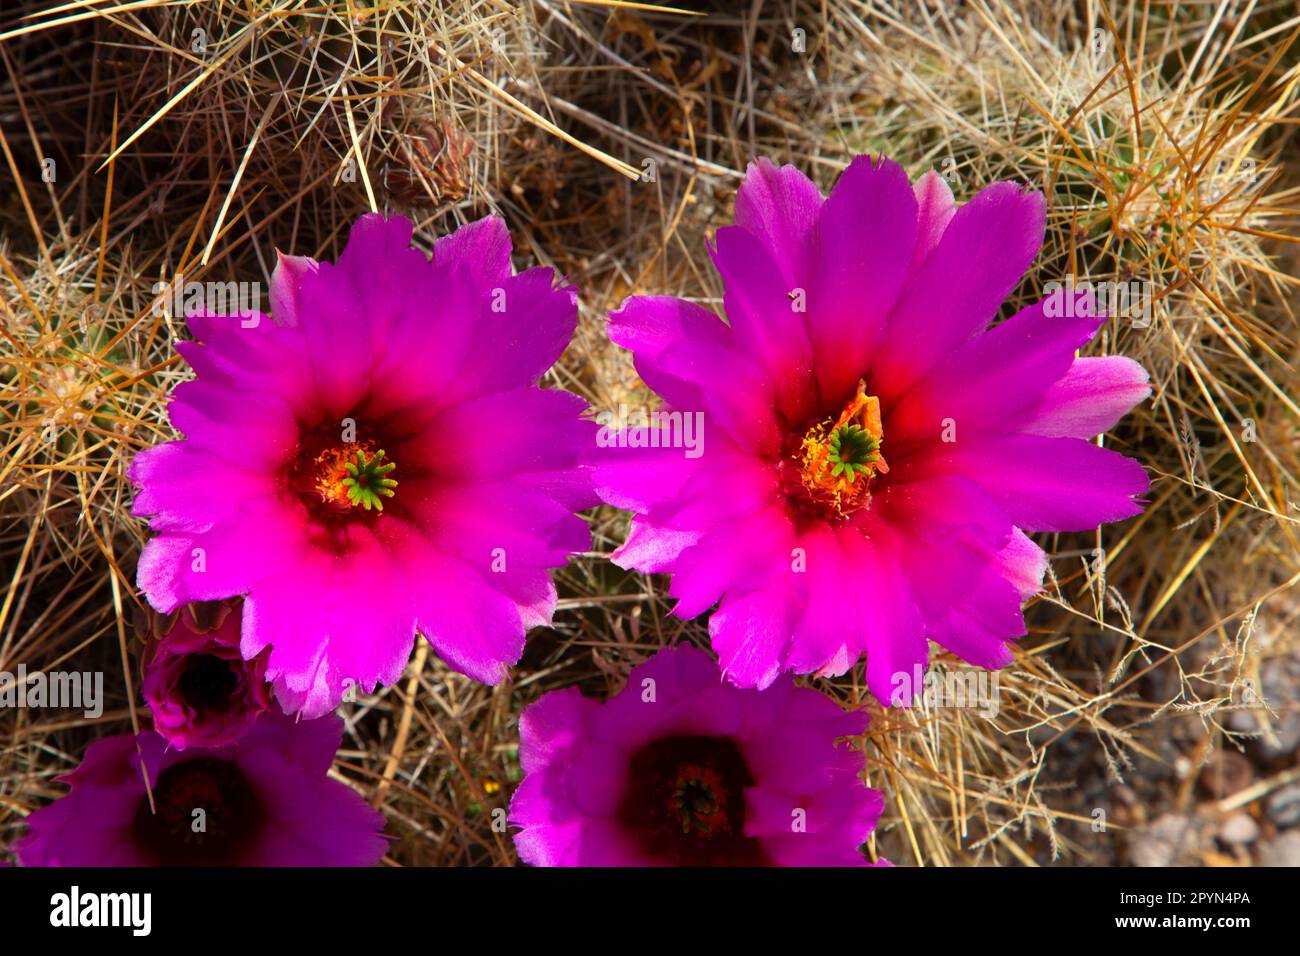 Cactus flowers, Fort Leaton State Historic Site, Texas Stock Photo